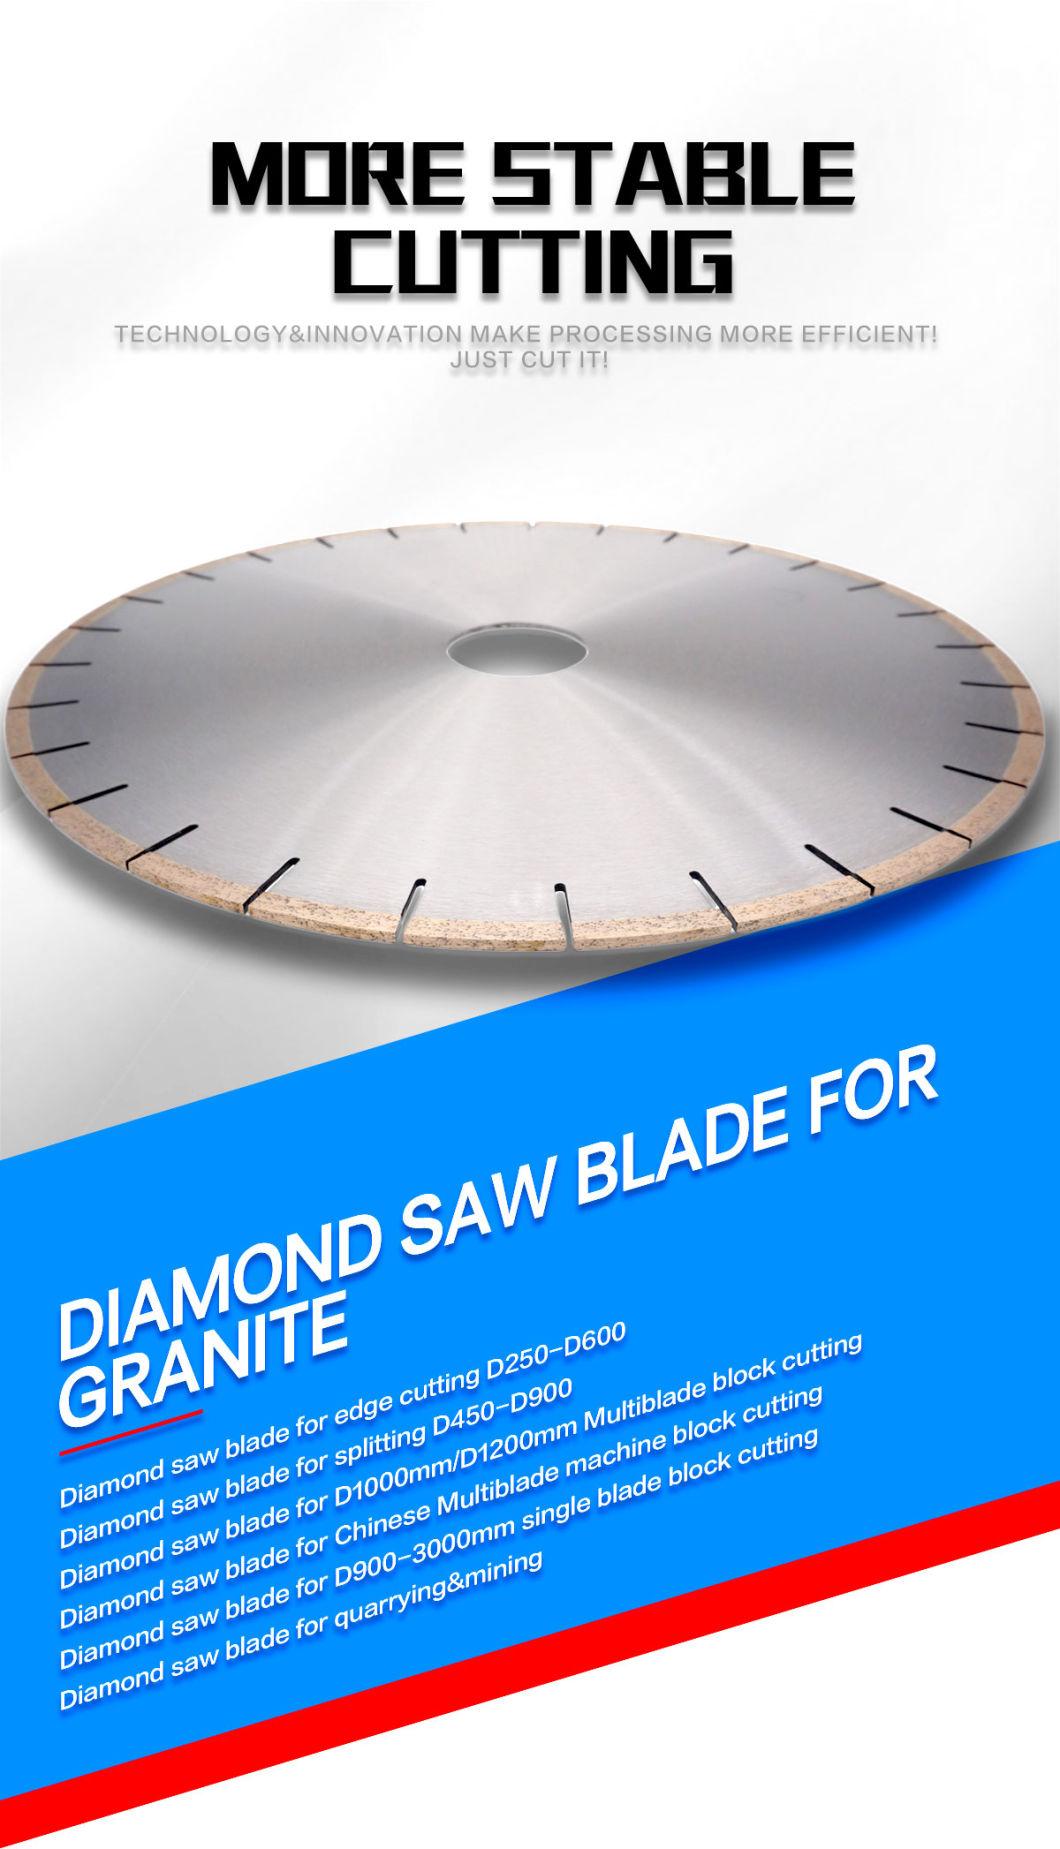 350mm Granite Saw Blades Key Slot Blade for Cutting Granite Hot Sale in India